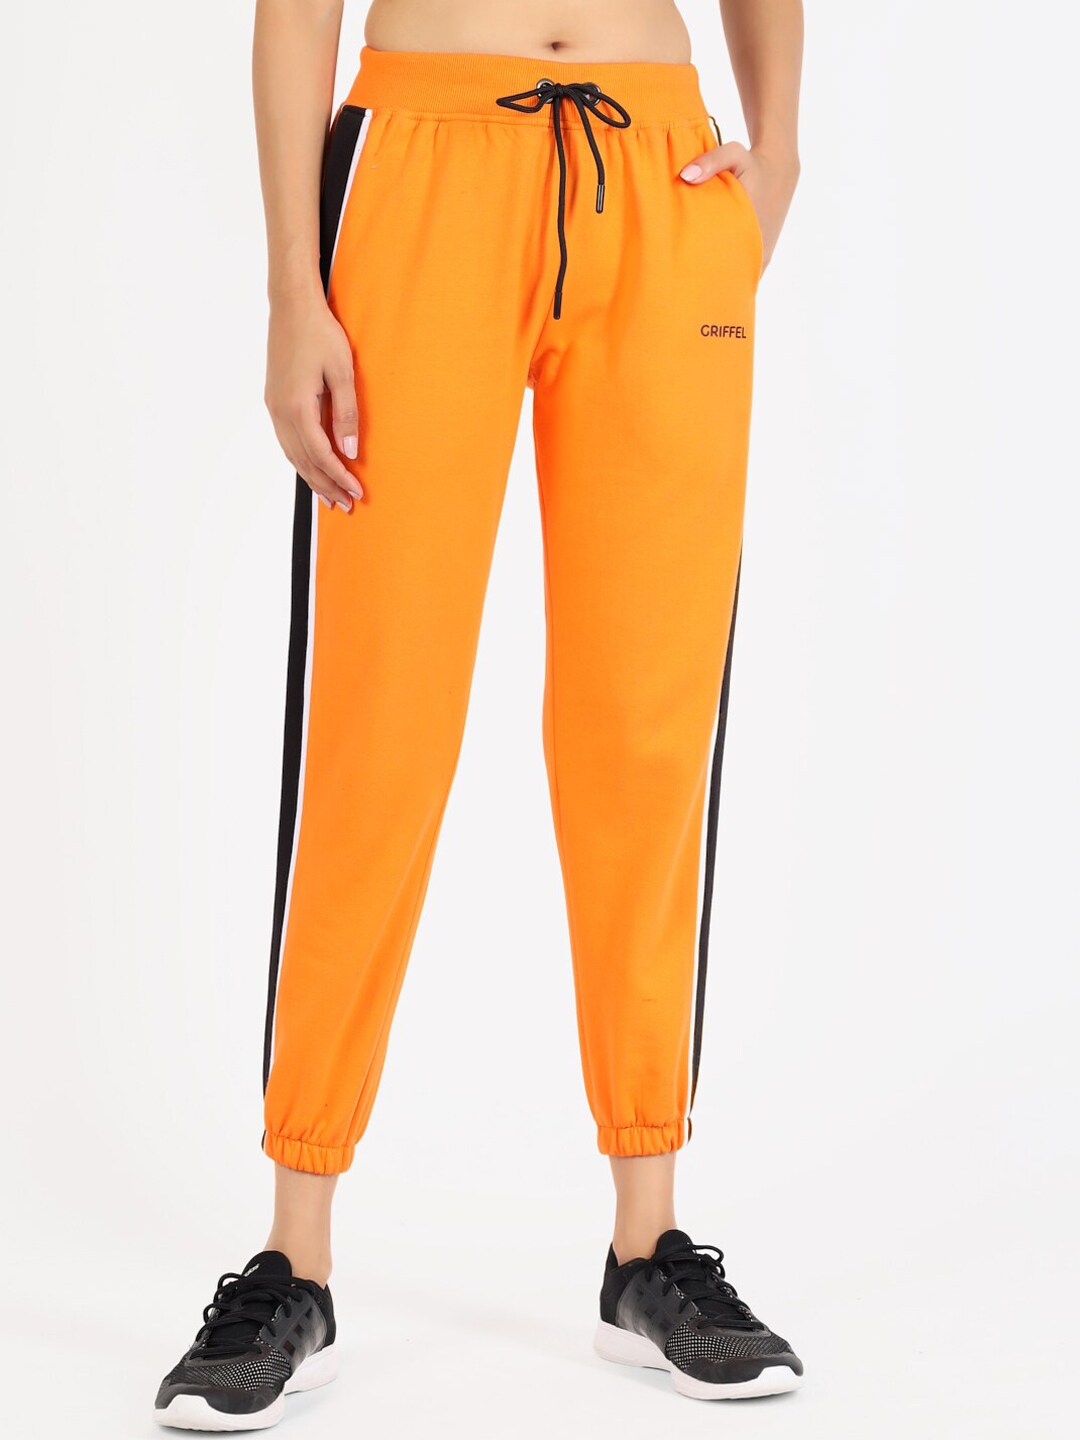 GRIFFEL Women Orange Solid Cotton Joggers Price in India